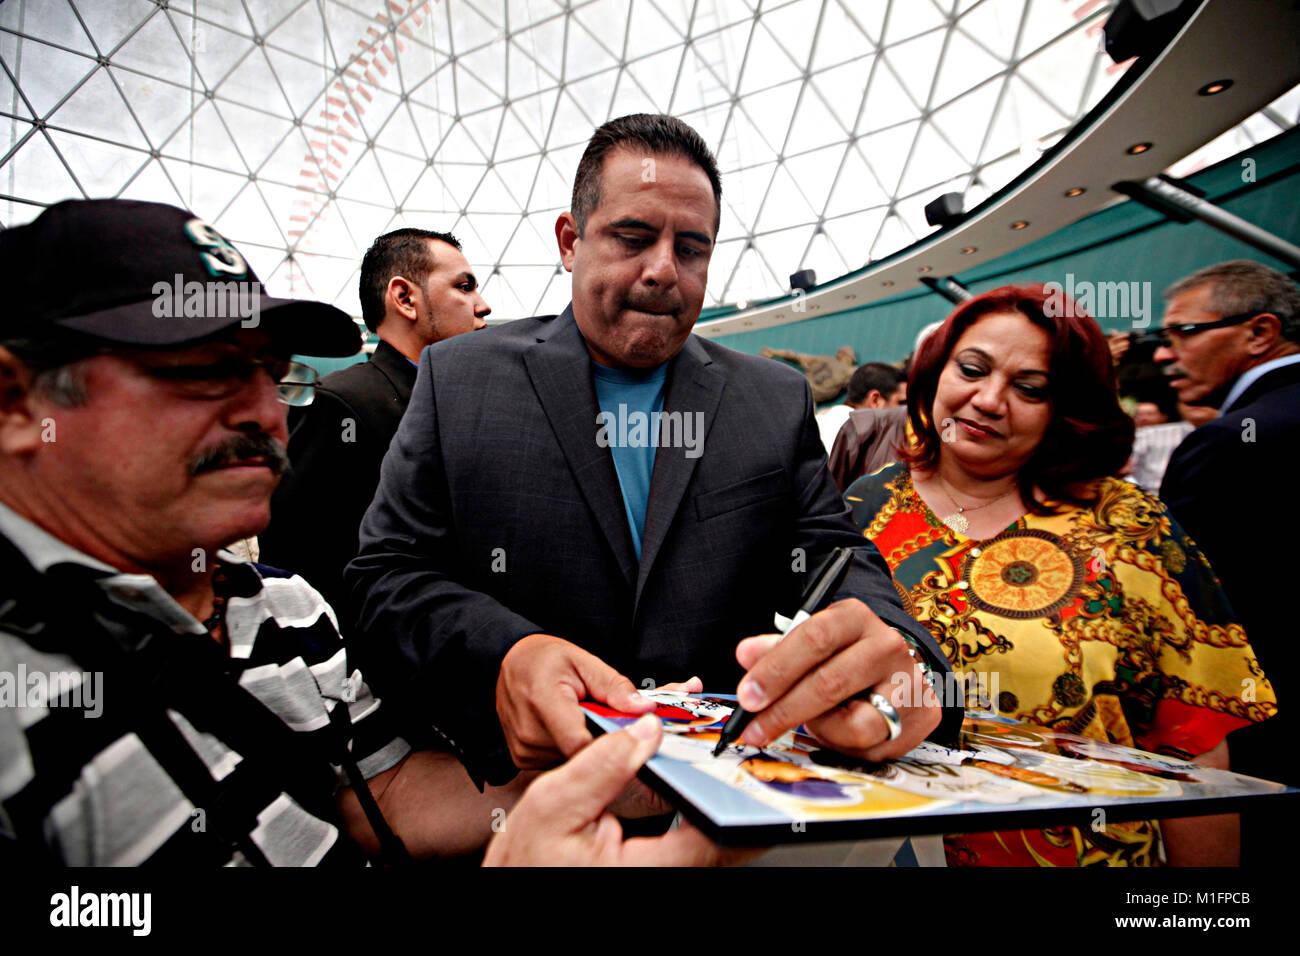 Naguanagua, Carabobo, Venezuela. 20th Nov, 2012. November 20, 2012. Wilson Alvarez © signs autographs to his fans, after he was exalted to the Hall of Fame of Venezuelan baseball, at the headquarters of the baseball museum, in the Naguanagua municipality of Carabobo state. Venezuela, November 20, 2012. Wilson Alvarez, played 14 seasons in the big leagues, walking organizations such as the Rangers, White Sox, Giants, Tampa Bay, Dogers, and was the first Venezuelan to launch a game without hit or Major league races. Photo: Juan Carlos Hernandez (Credit Image: © Juan Carlos Hernandez via ZU Stock Photo